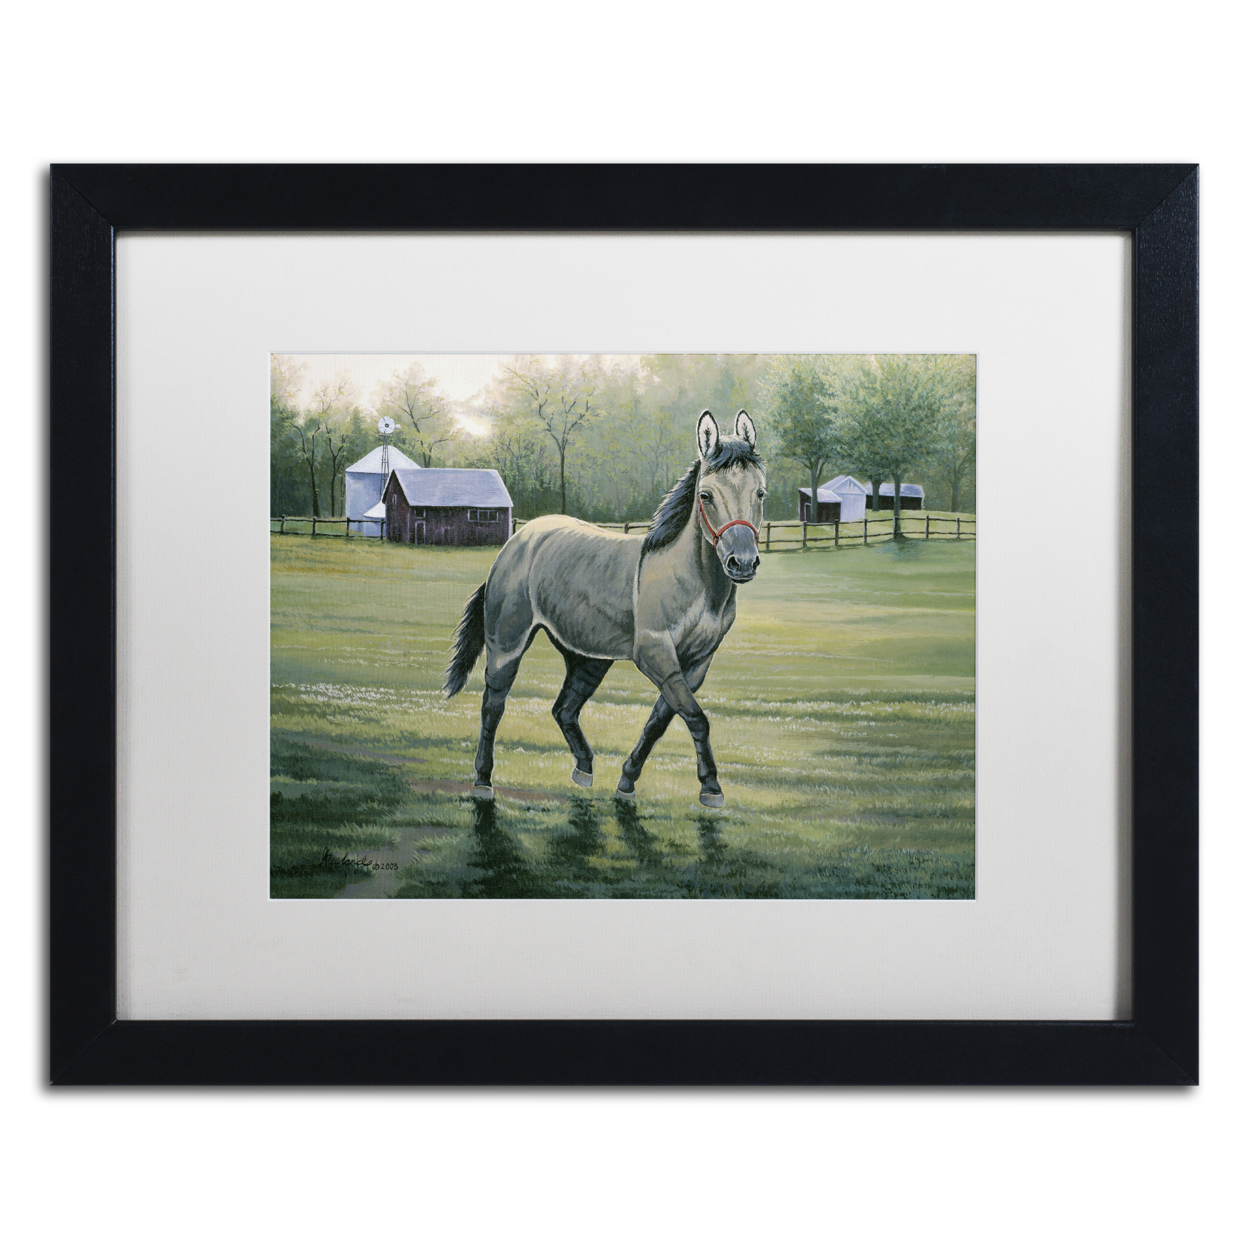 Jenny Newland 'In The Pasture' Black Wooden Framed Art 18 X 22 Inches